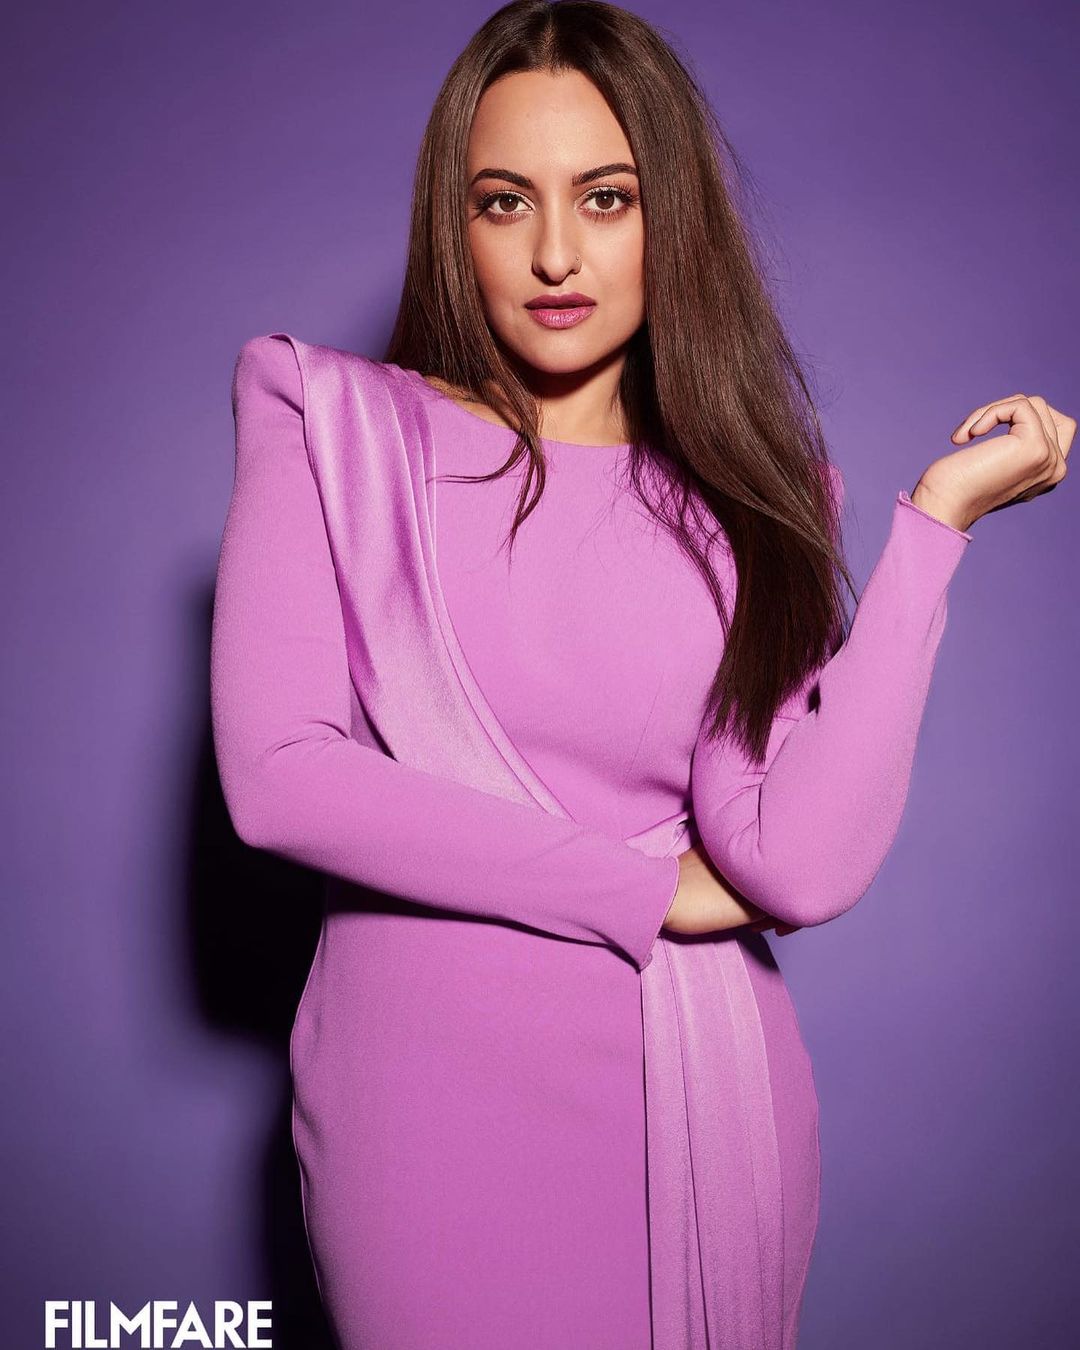 Sonakshi Sinha aces the lilac dress.